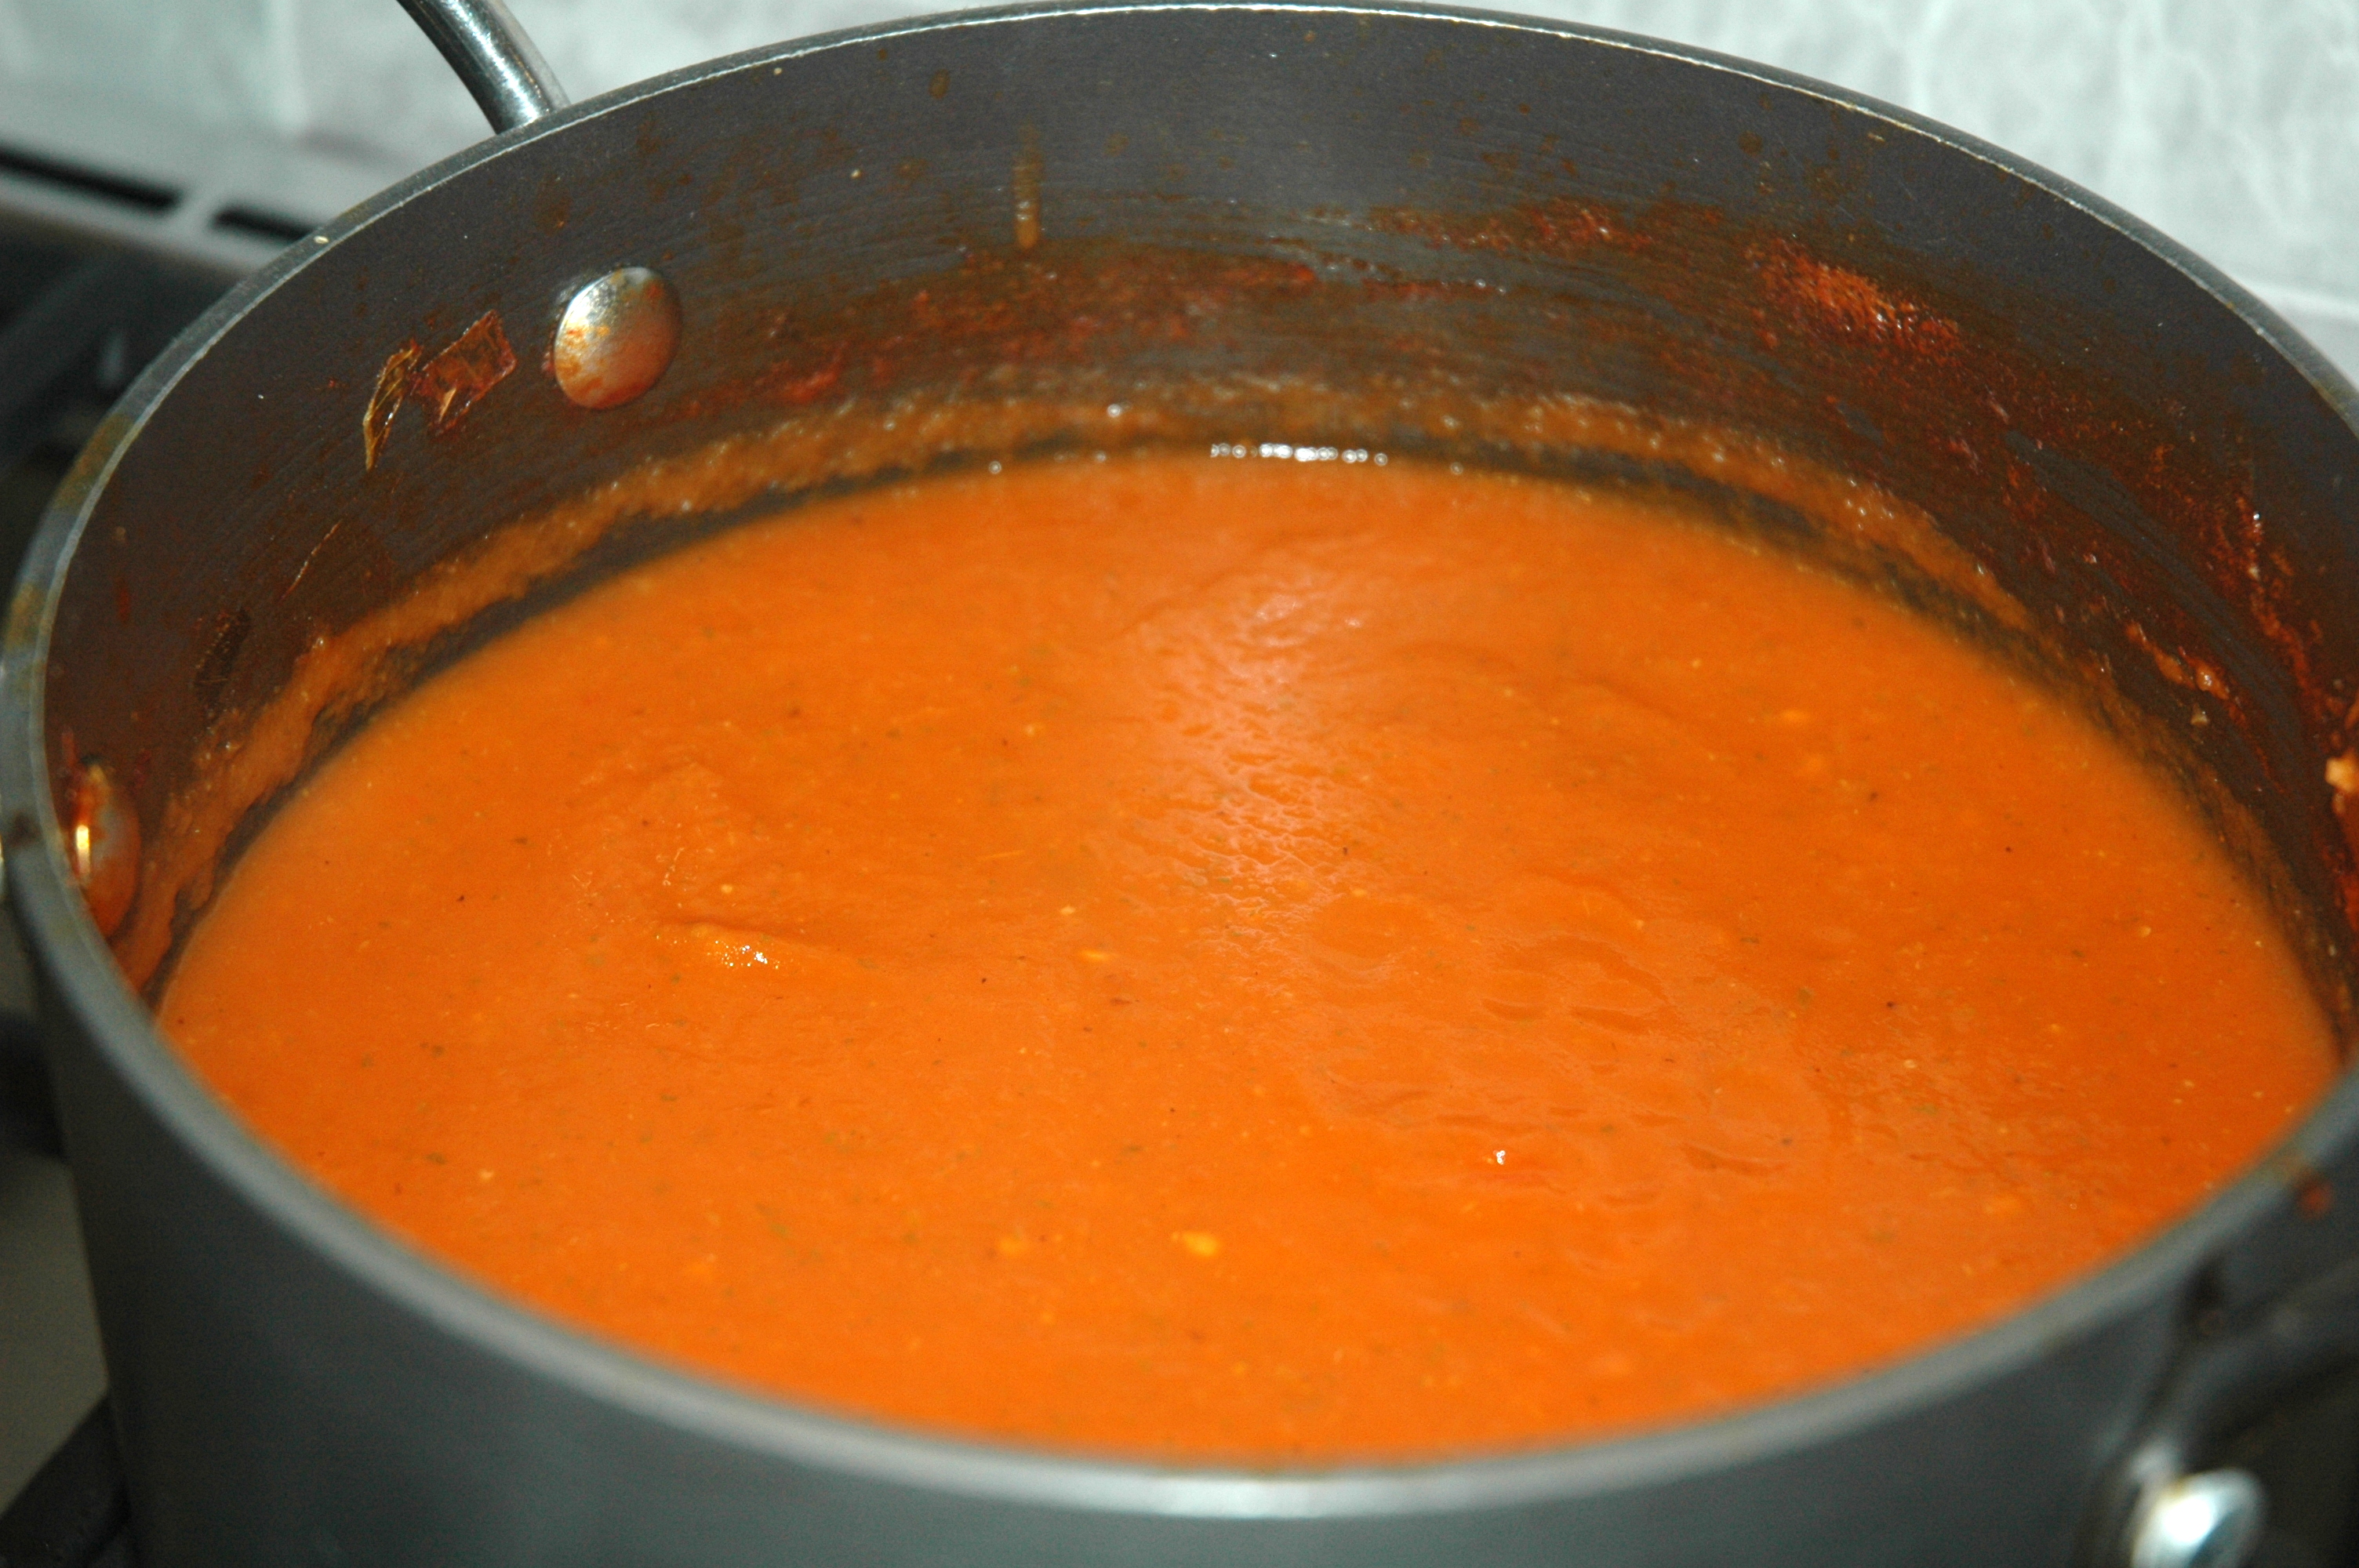 Finished tomato sauce in pot